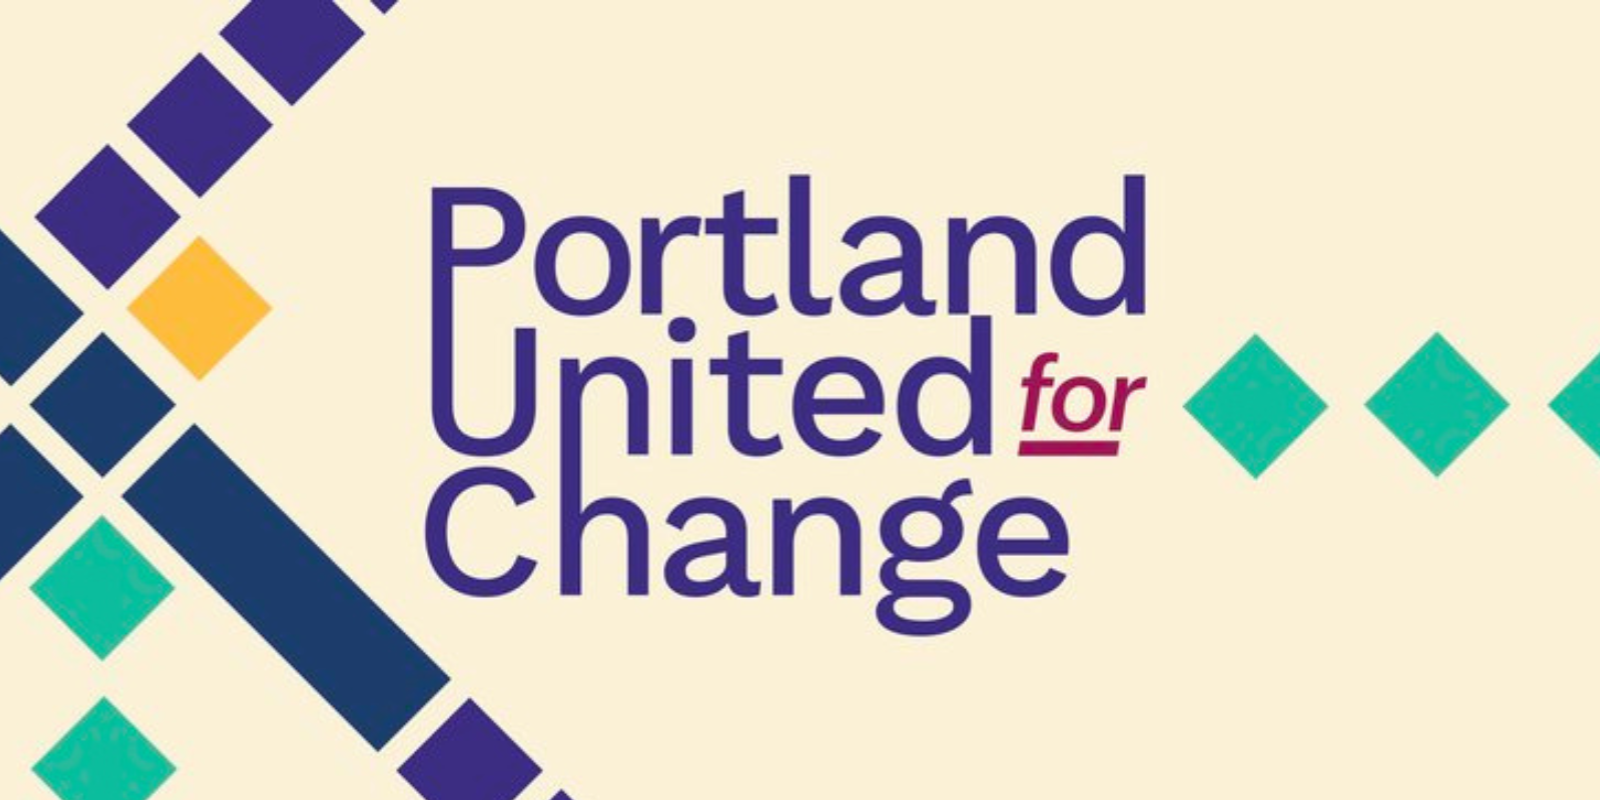 Logo that reads "Portland United for Change"